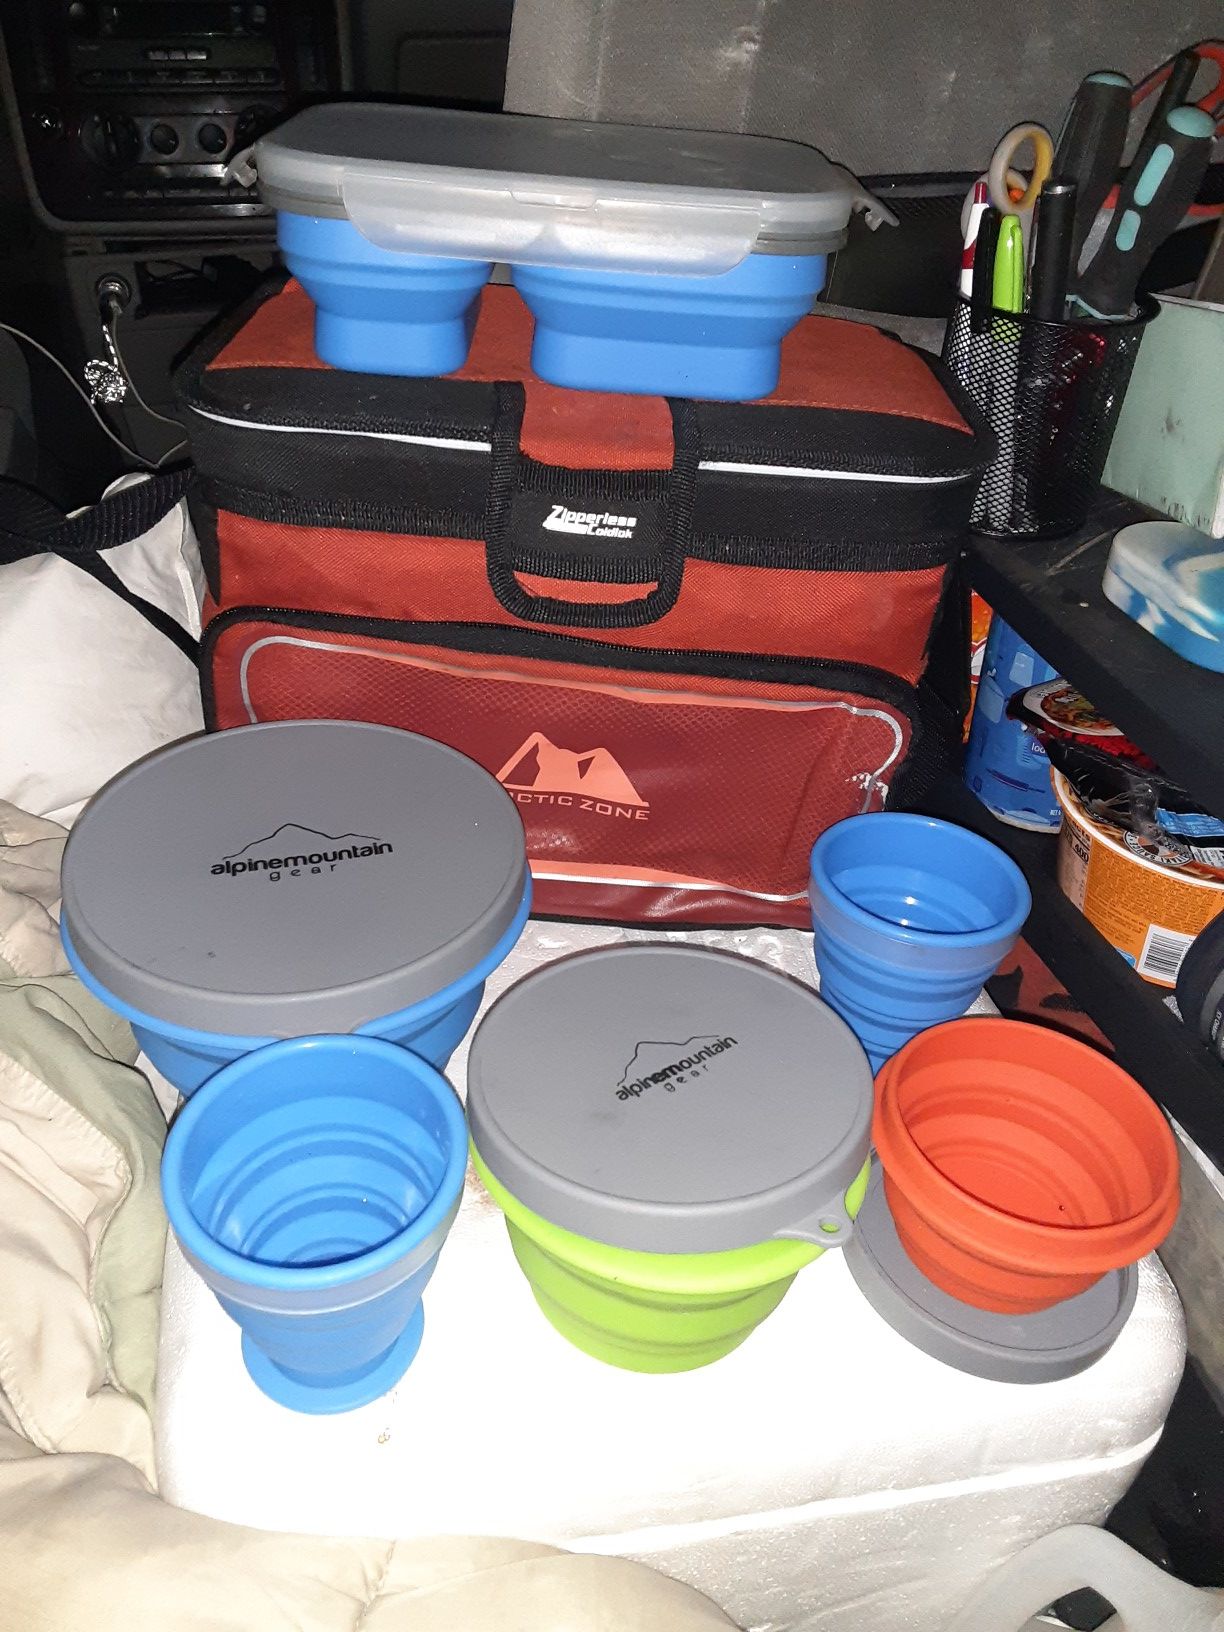 A cooler and 6 collapsible dishes. 2 cups, 3 bowls and a plate